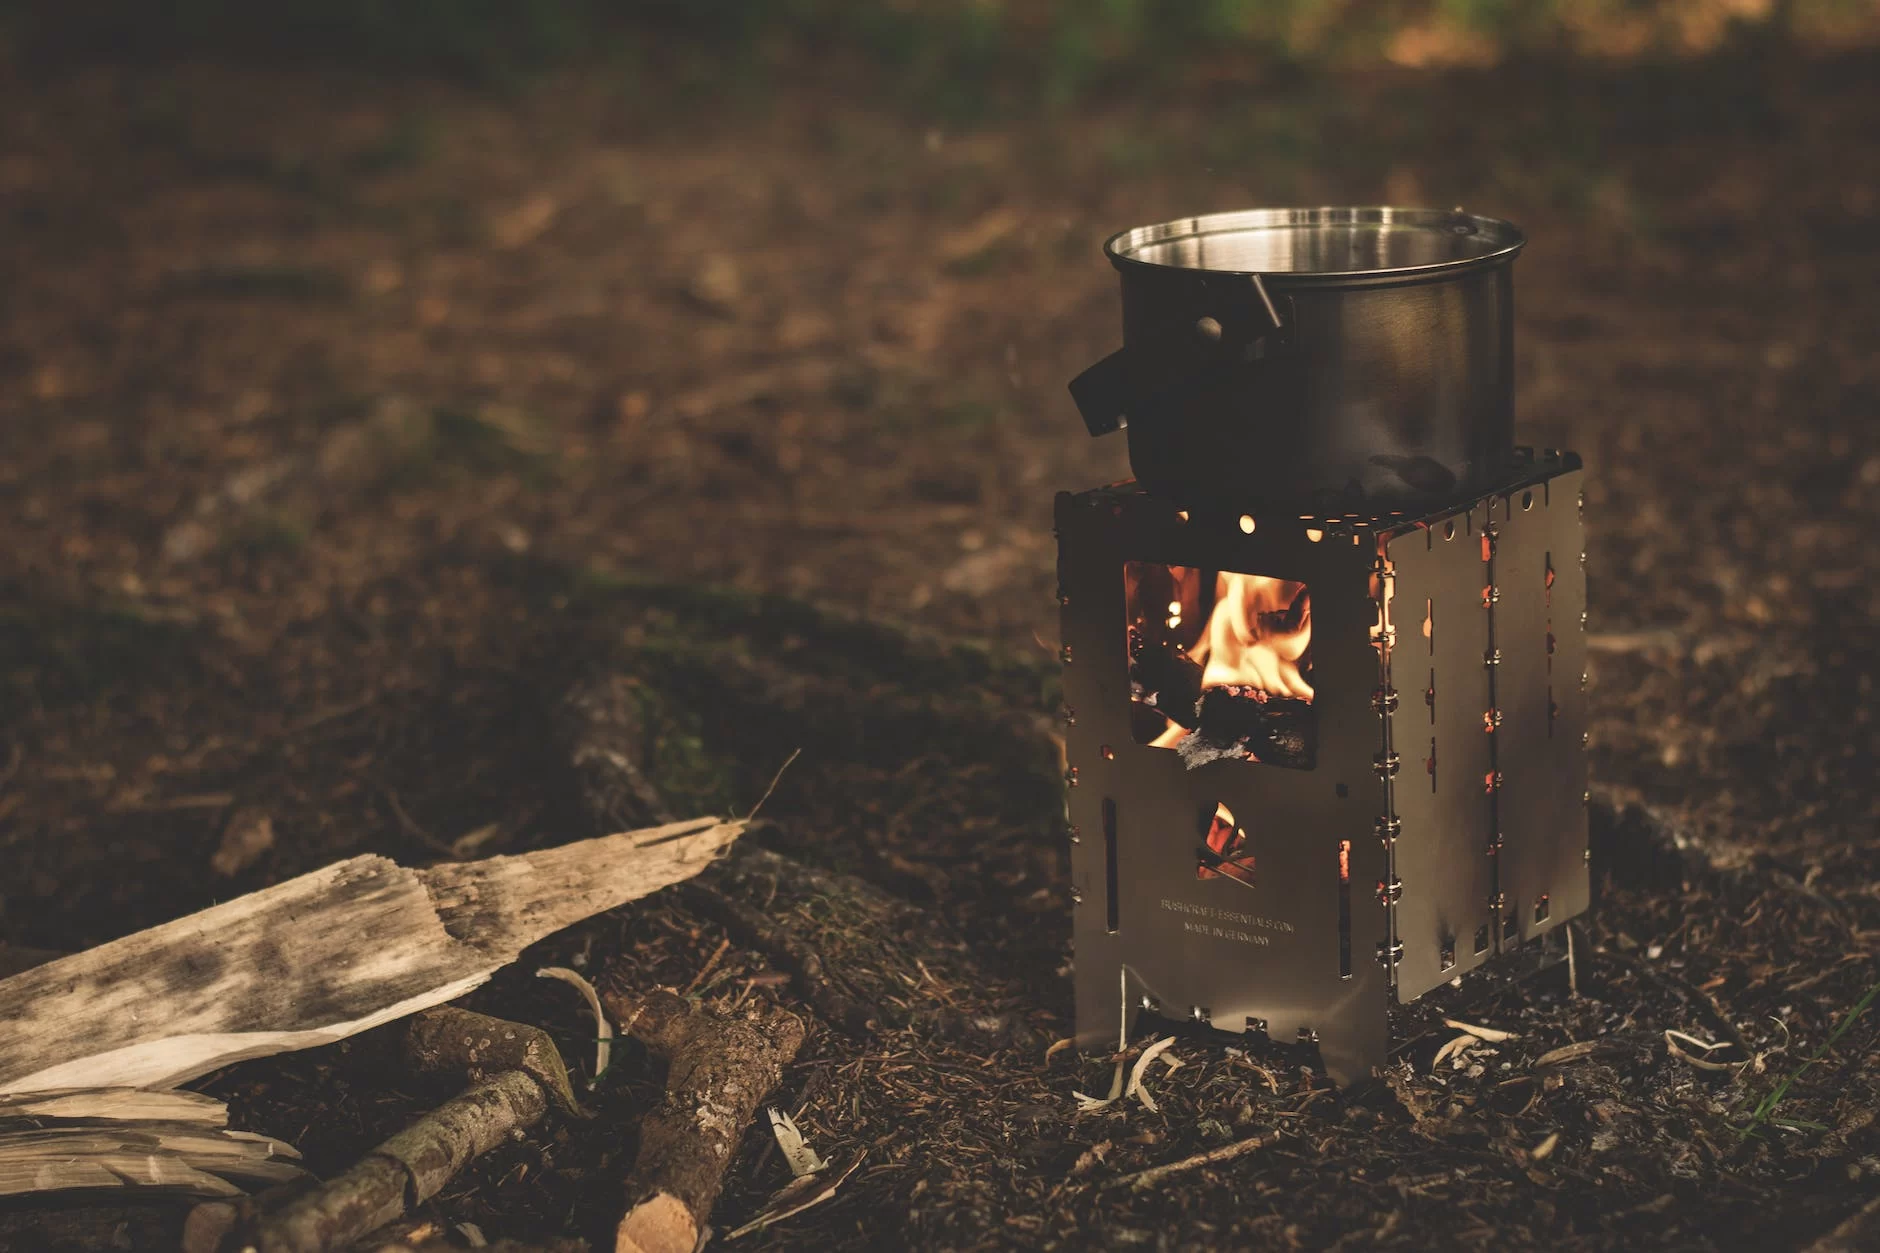 Camping Wood Stoves for Backpacking stainless steel pot on brown wood stove outside during night time